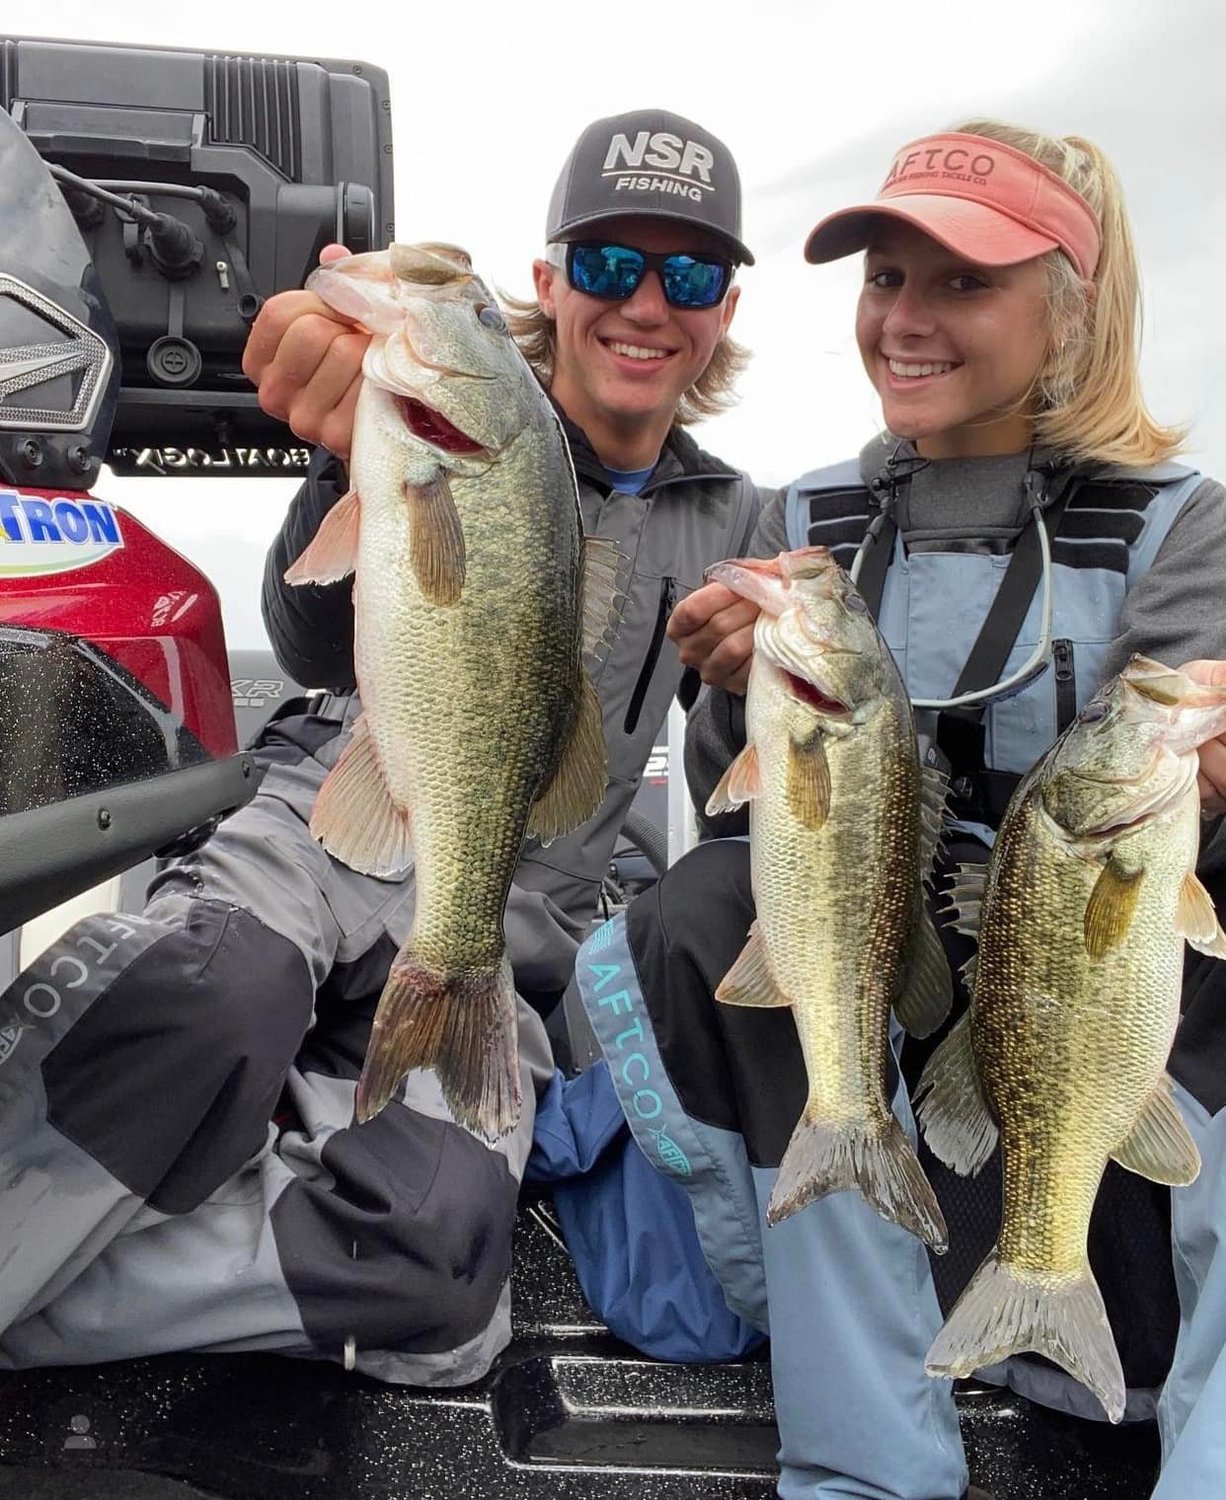 High school anglers Rafe Sexton and Hillary
Marti